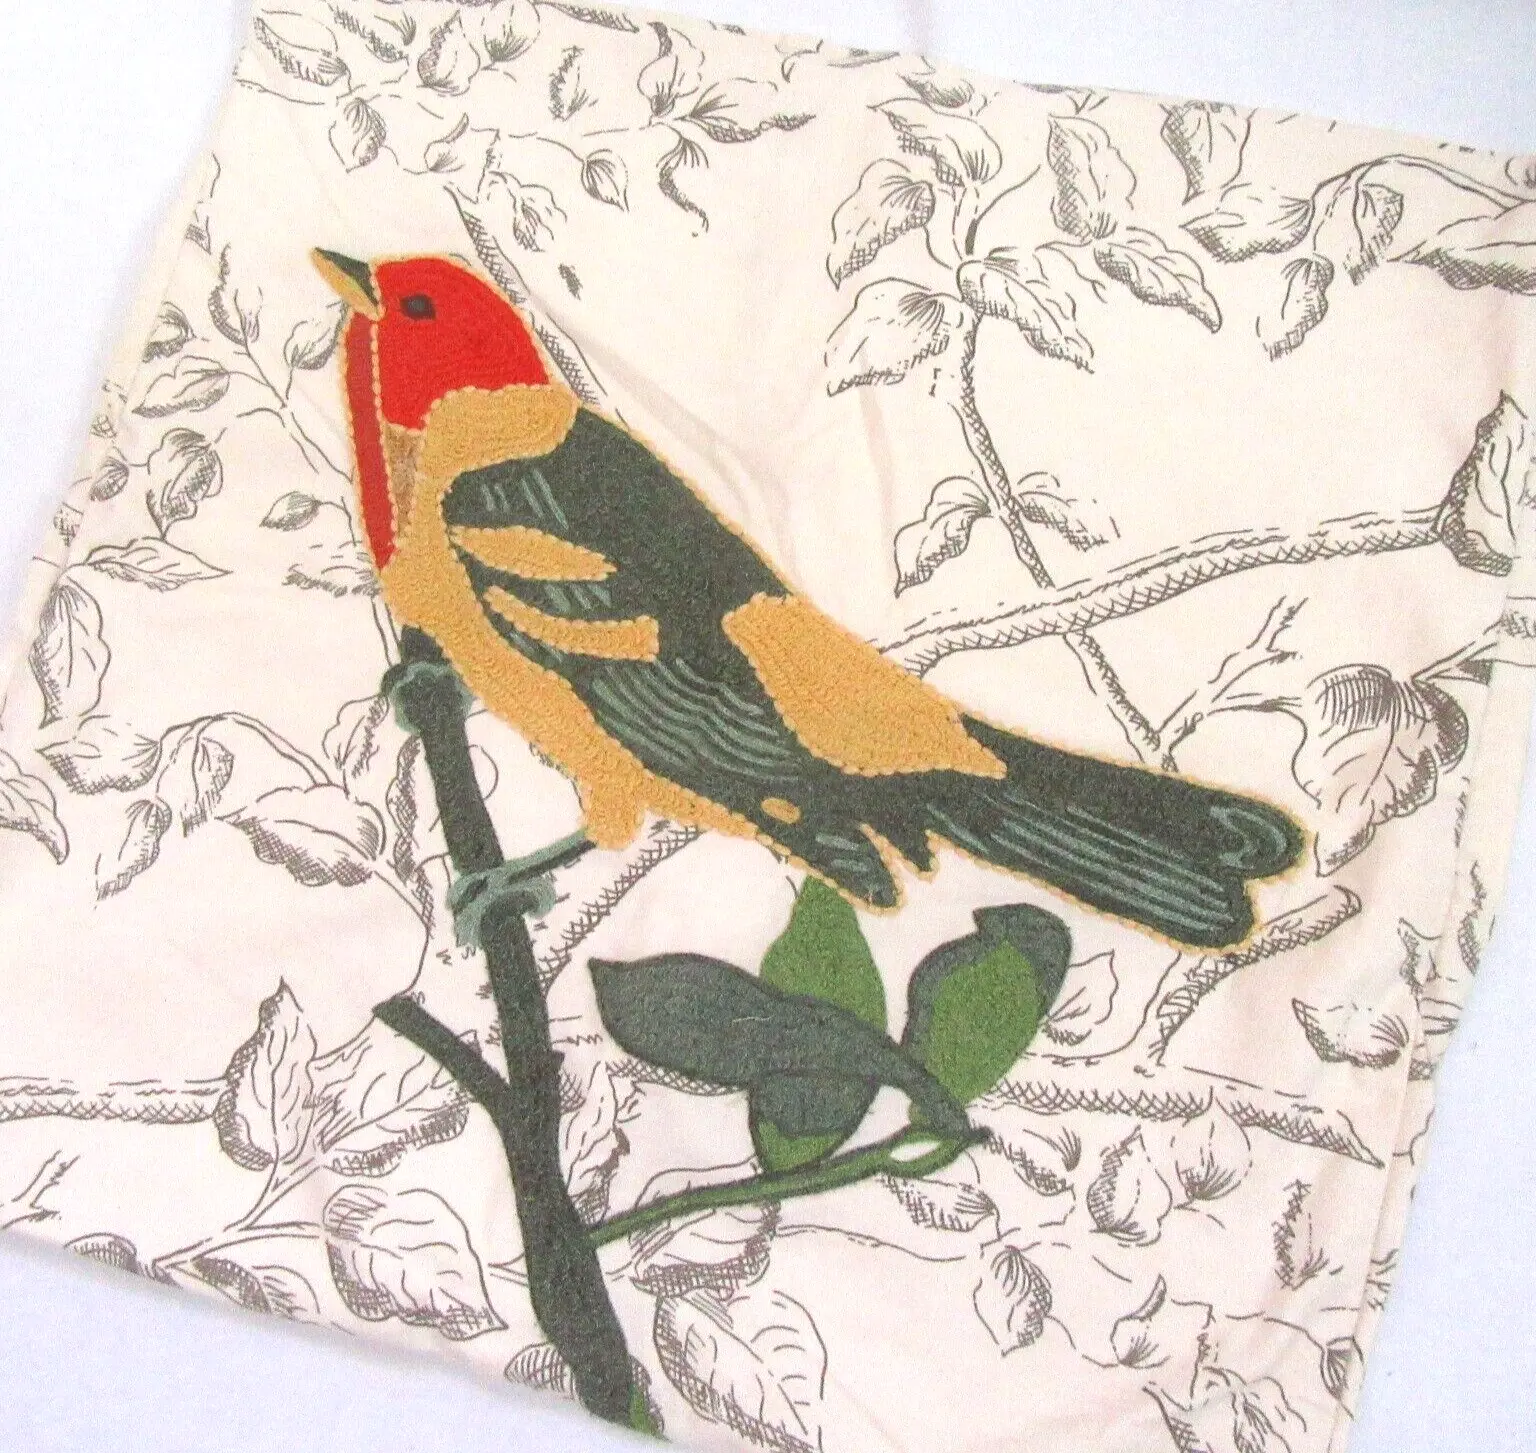 Pottery Barn Bird Branch Crewel Embroidered 18-inch Square Pillow Cover - $36.00